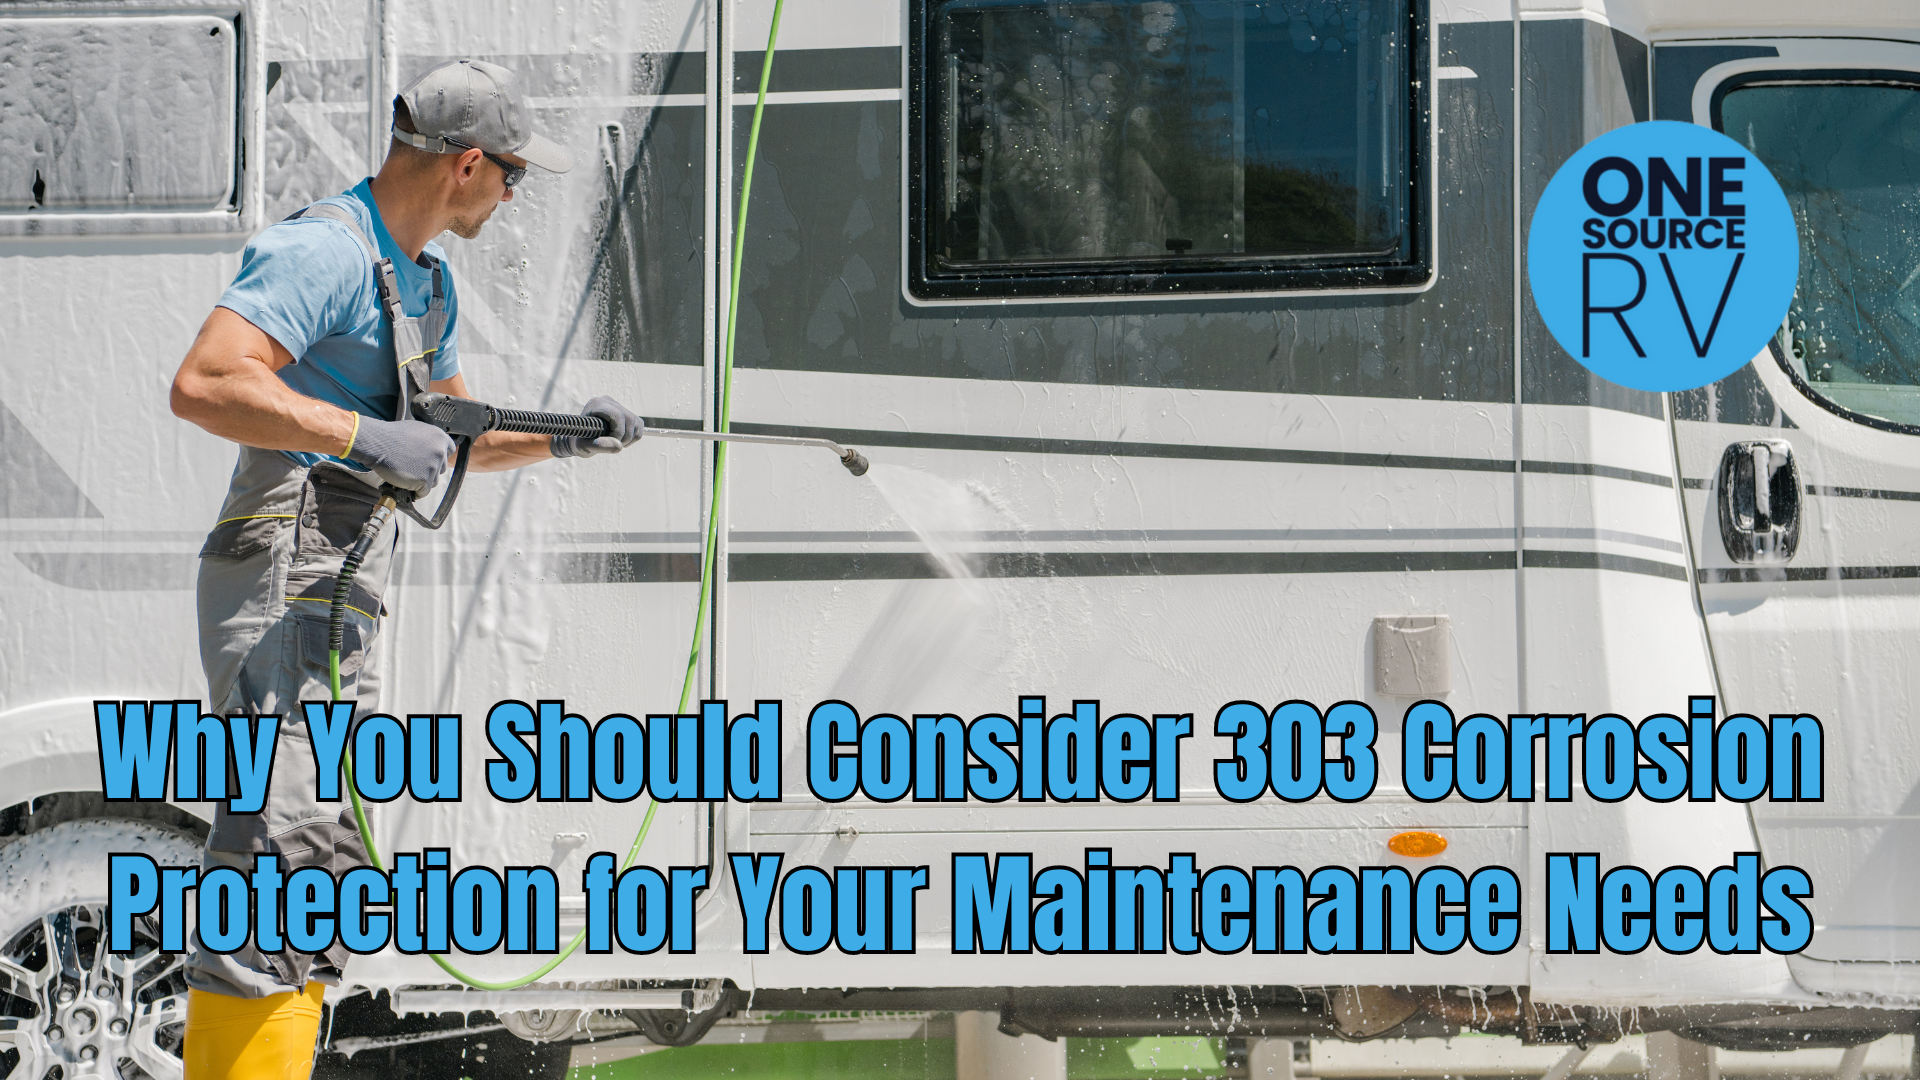 Why You Should Consider 303 Corrosion Protection for Your Maintenance Needs